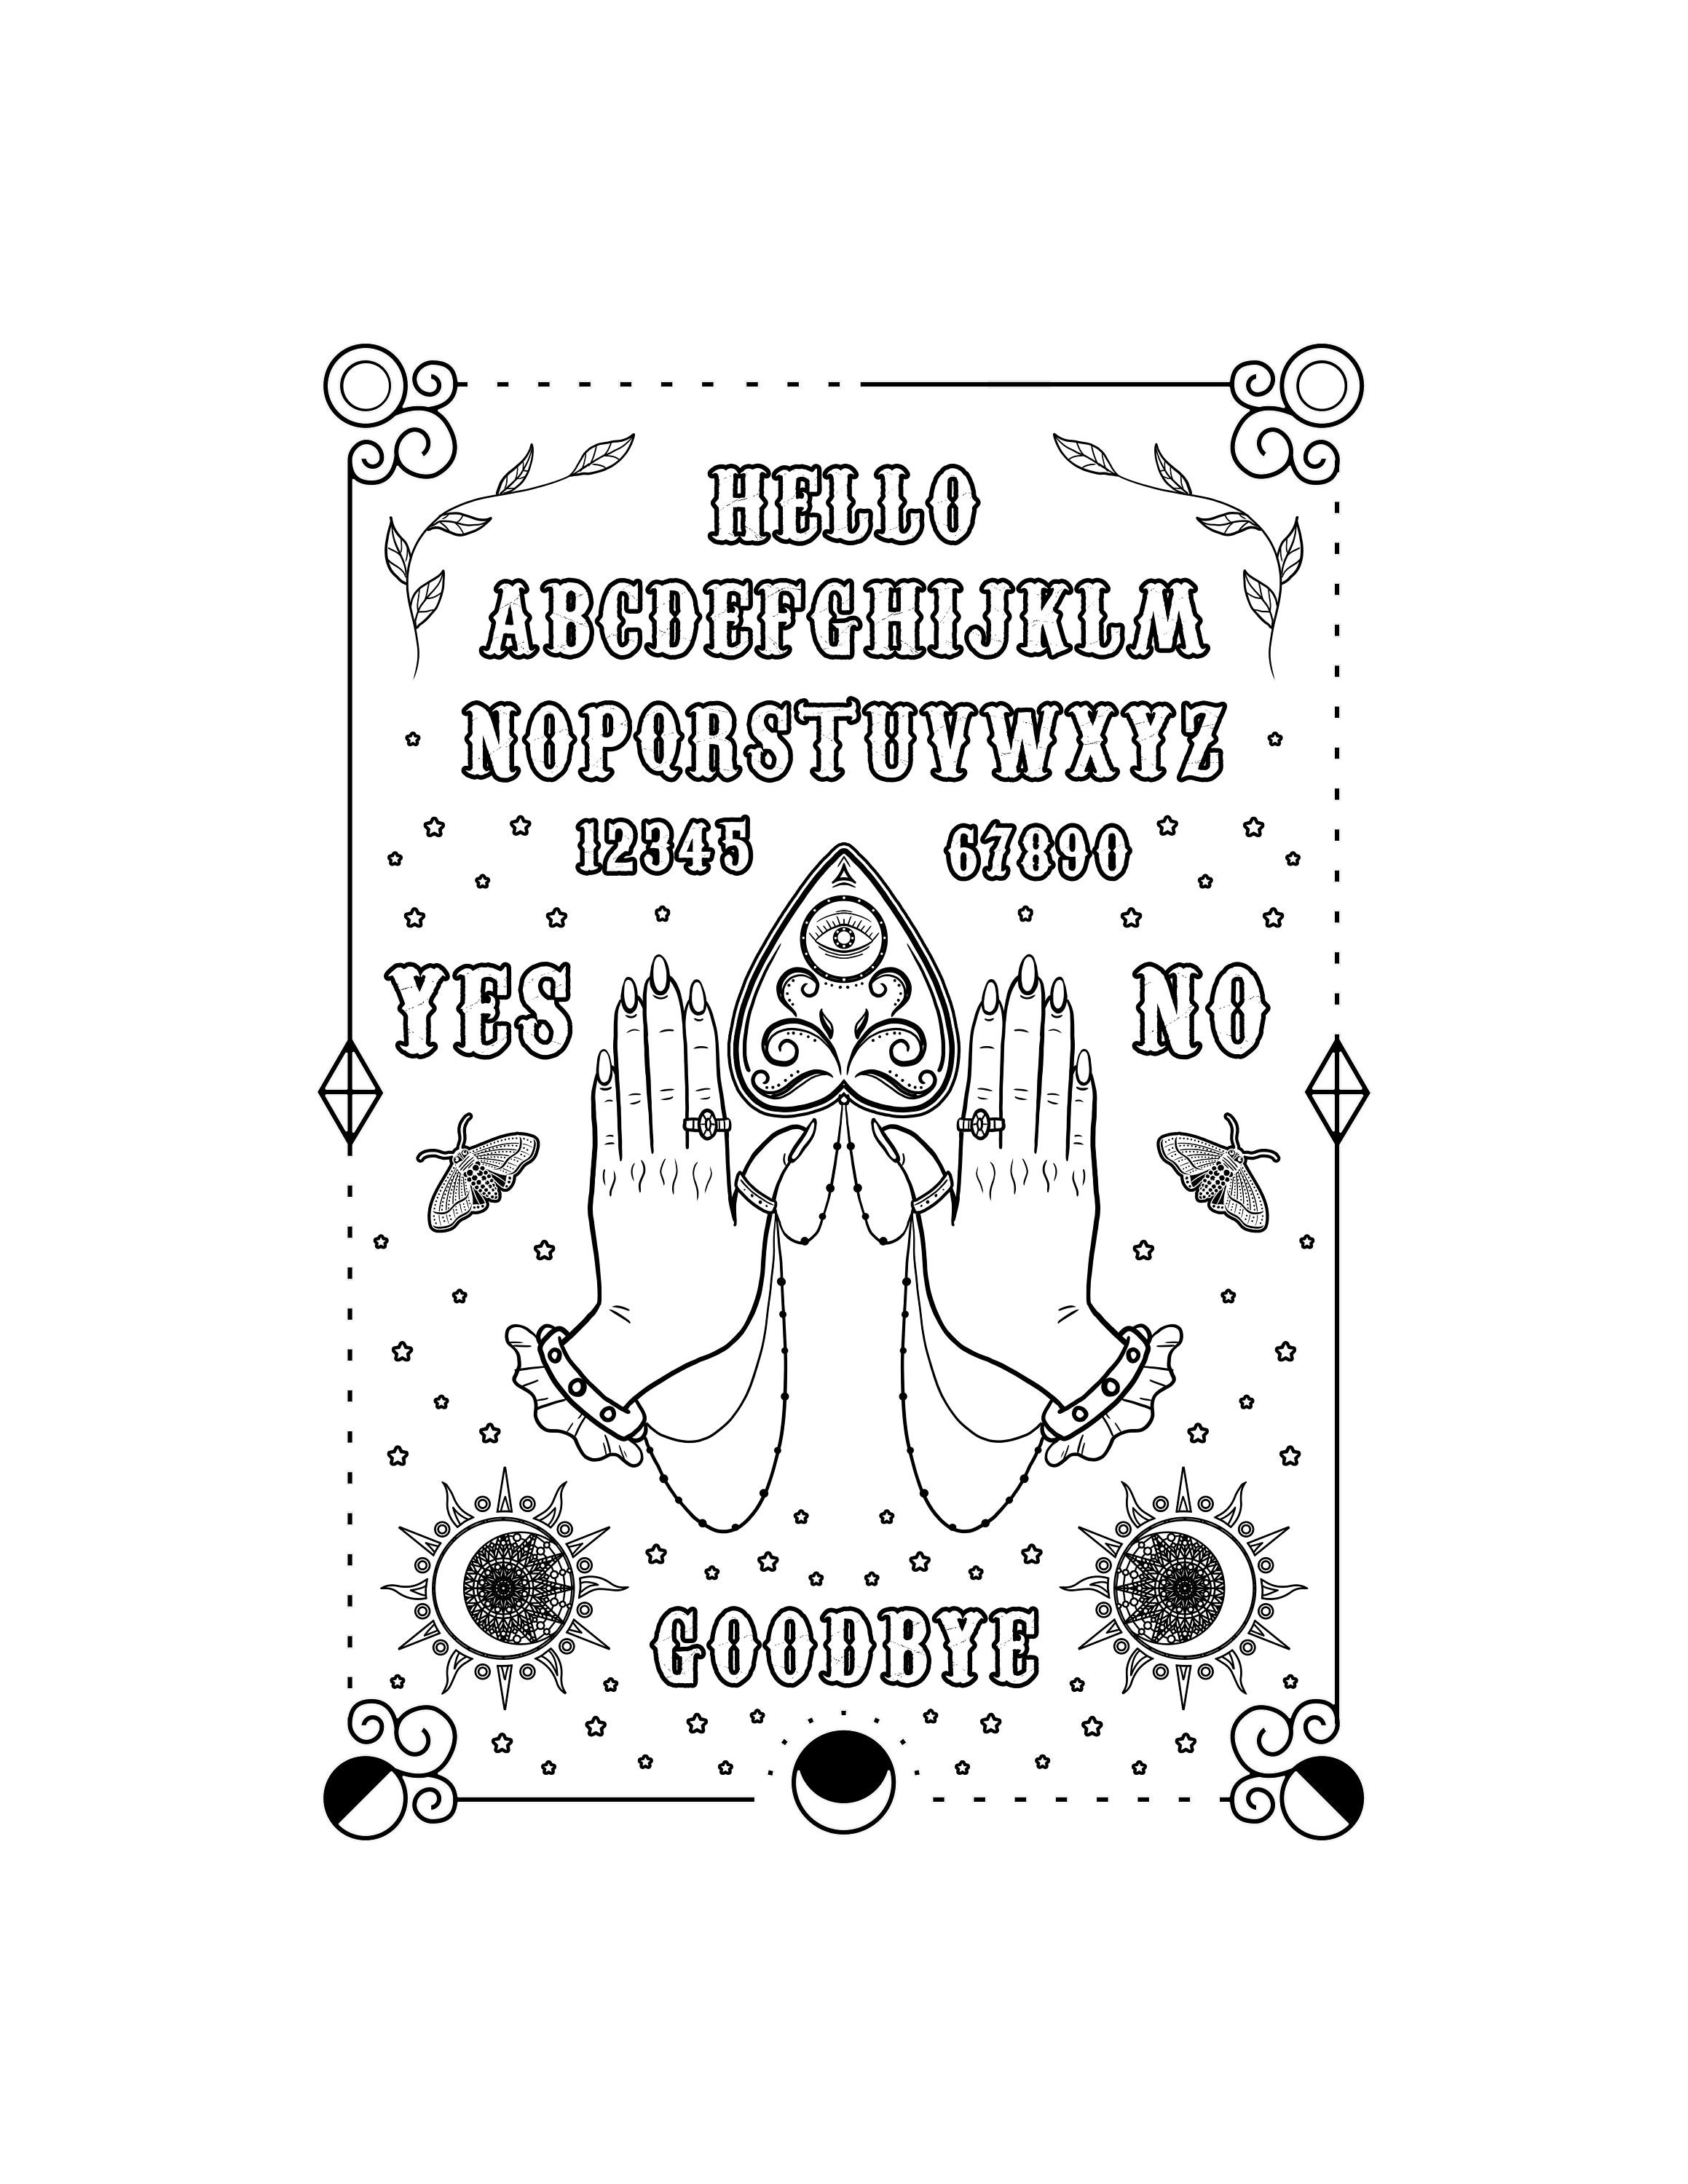 WEDDING COLORING BOOK FOR kids: Anxiety WEDDING Coloring Books For Adults  And Kids Relaxation And Stress Relief a book by Fatima Coloring